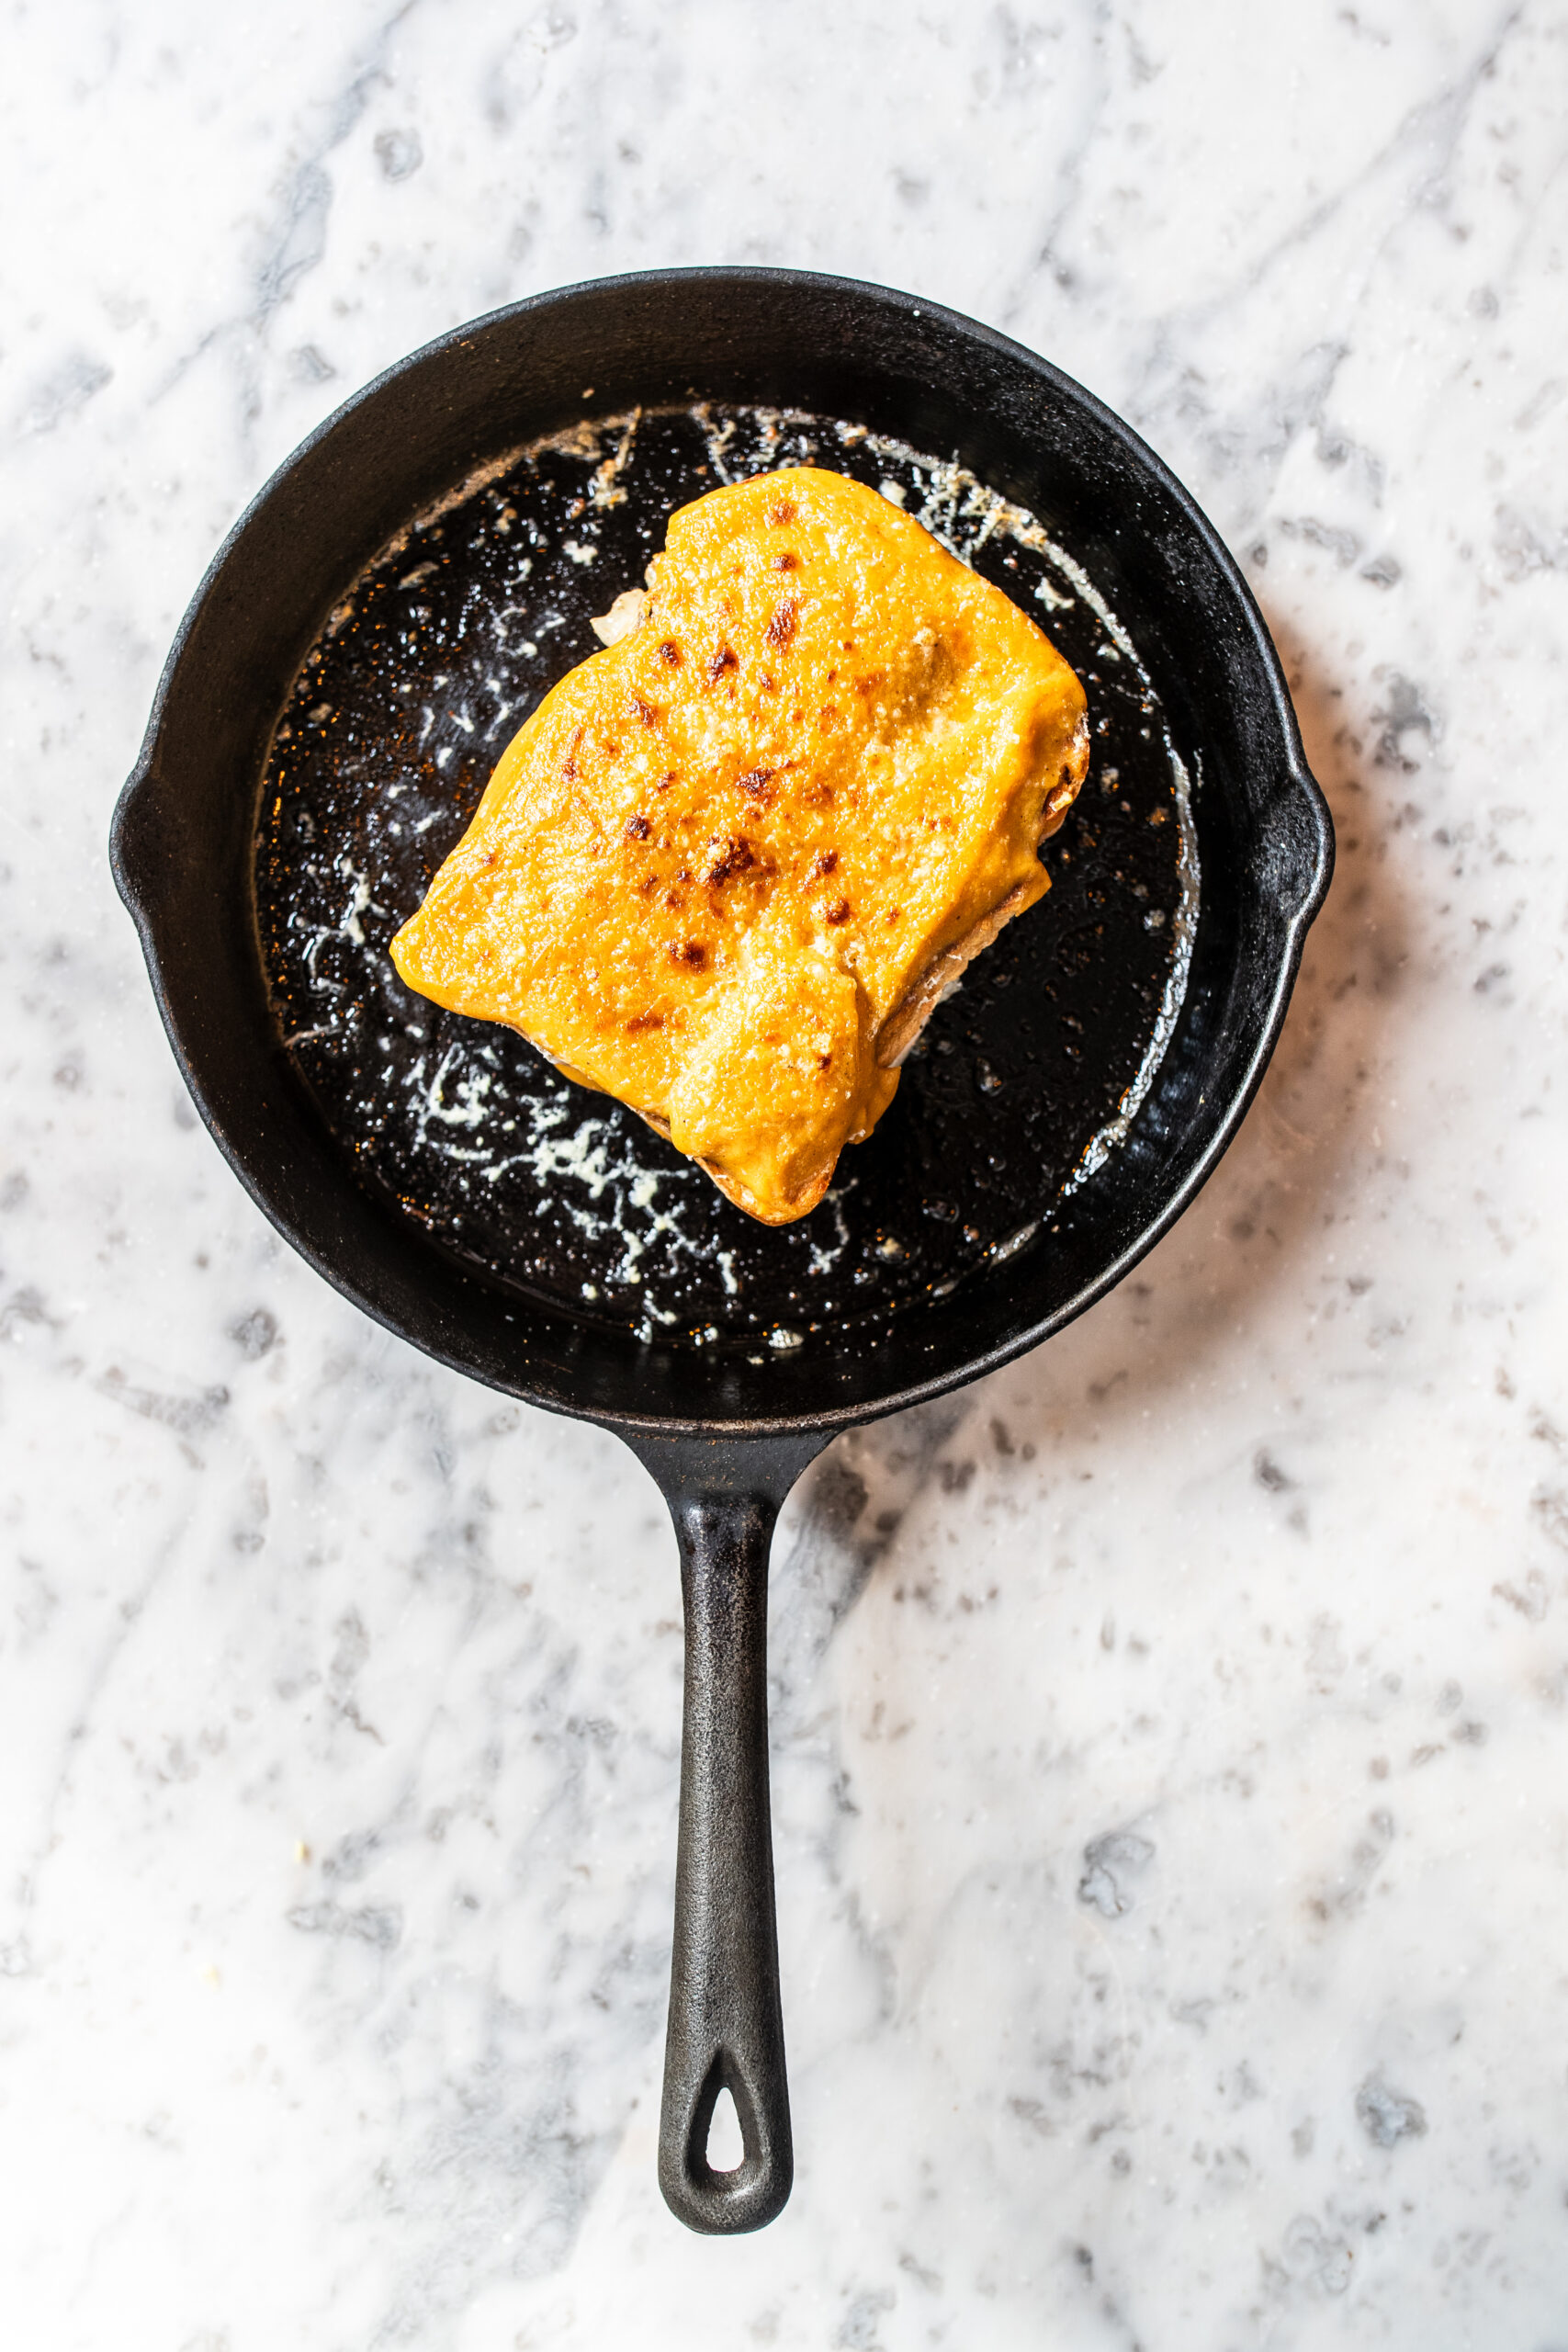 Overhead shot of a croque-monsieur rarebit in a cast iron pan on a marble table